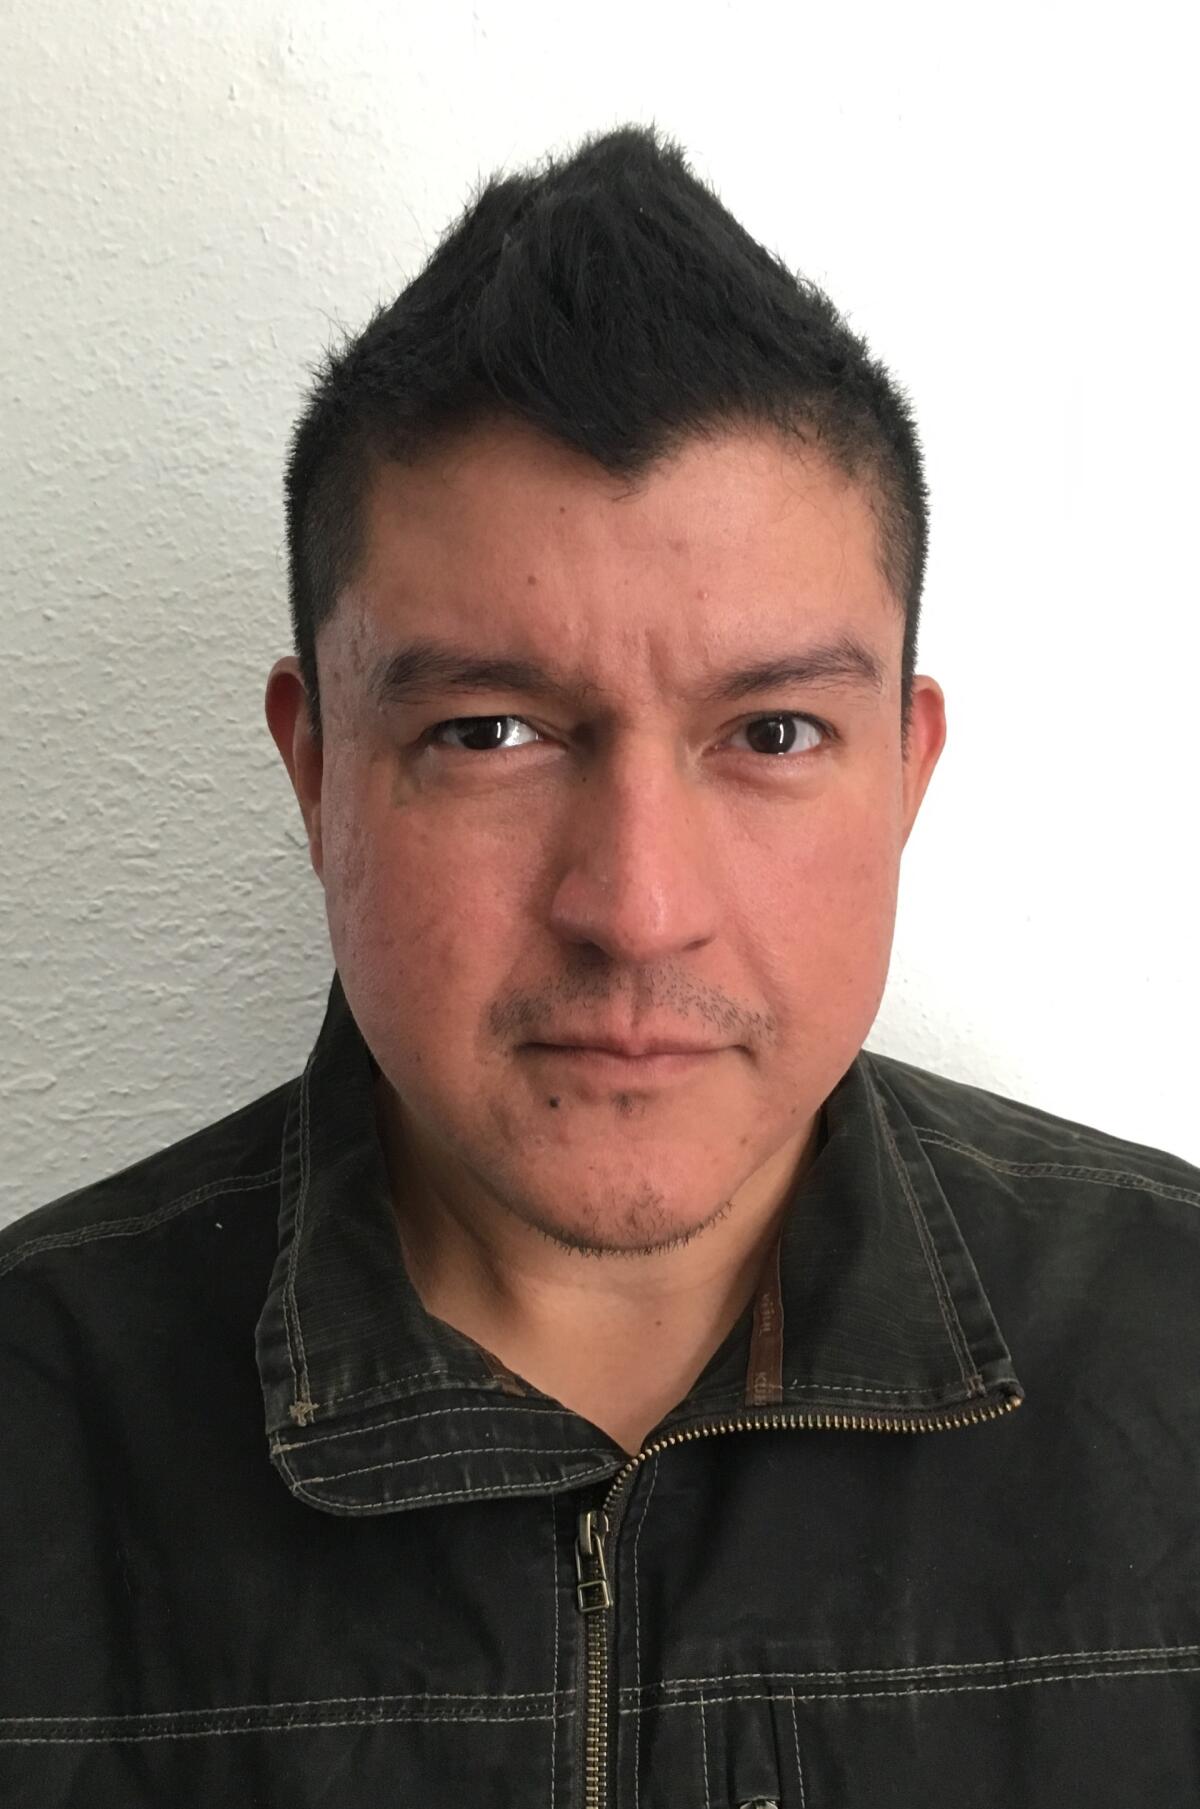 A portrait of a man with spiked black hair wearing a dark denim jacket.